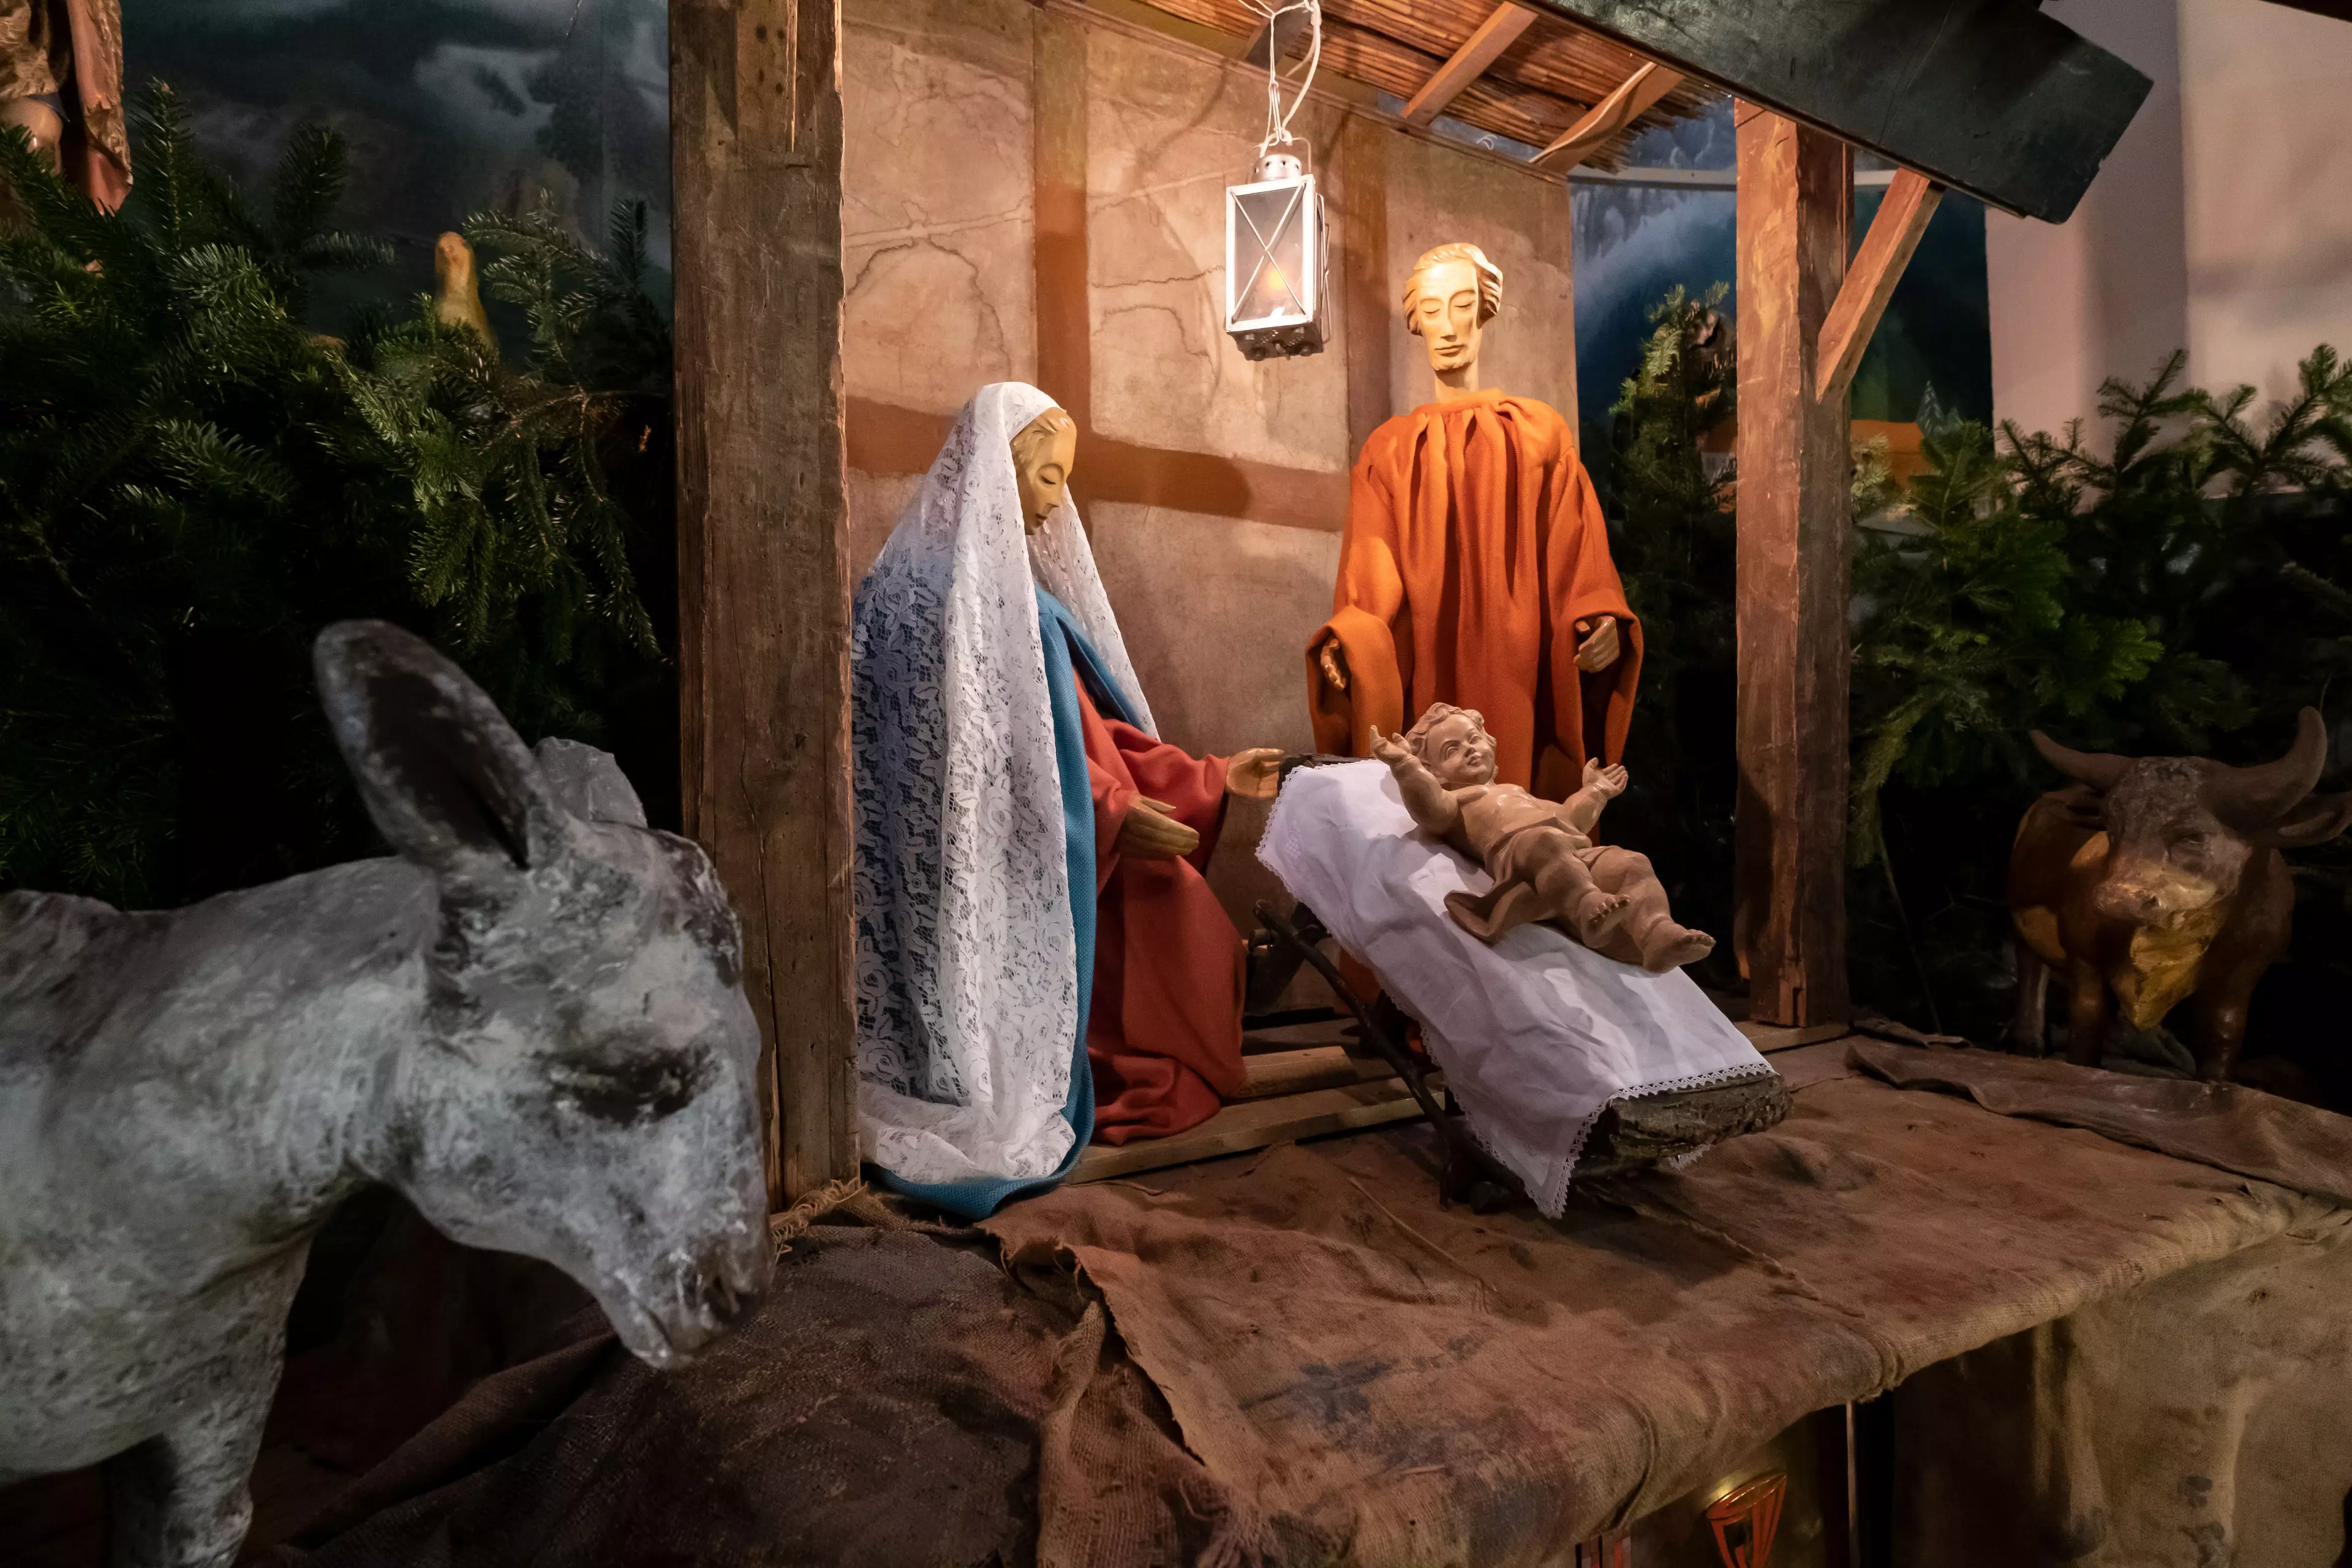 The nativity is a stressful event for parents and children alike.